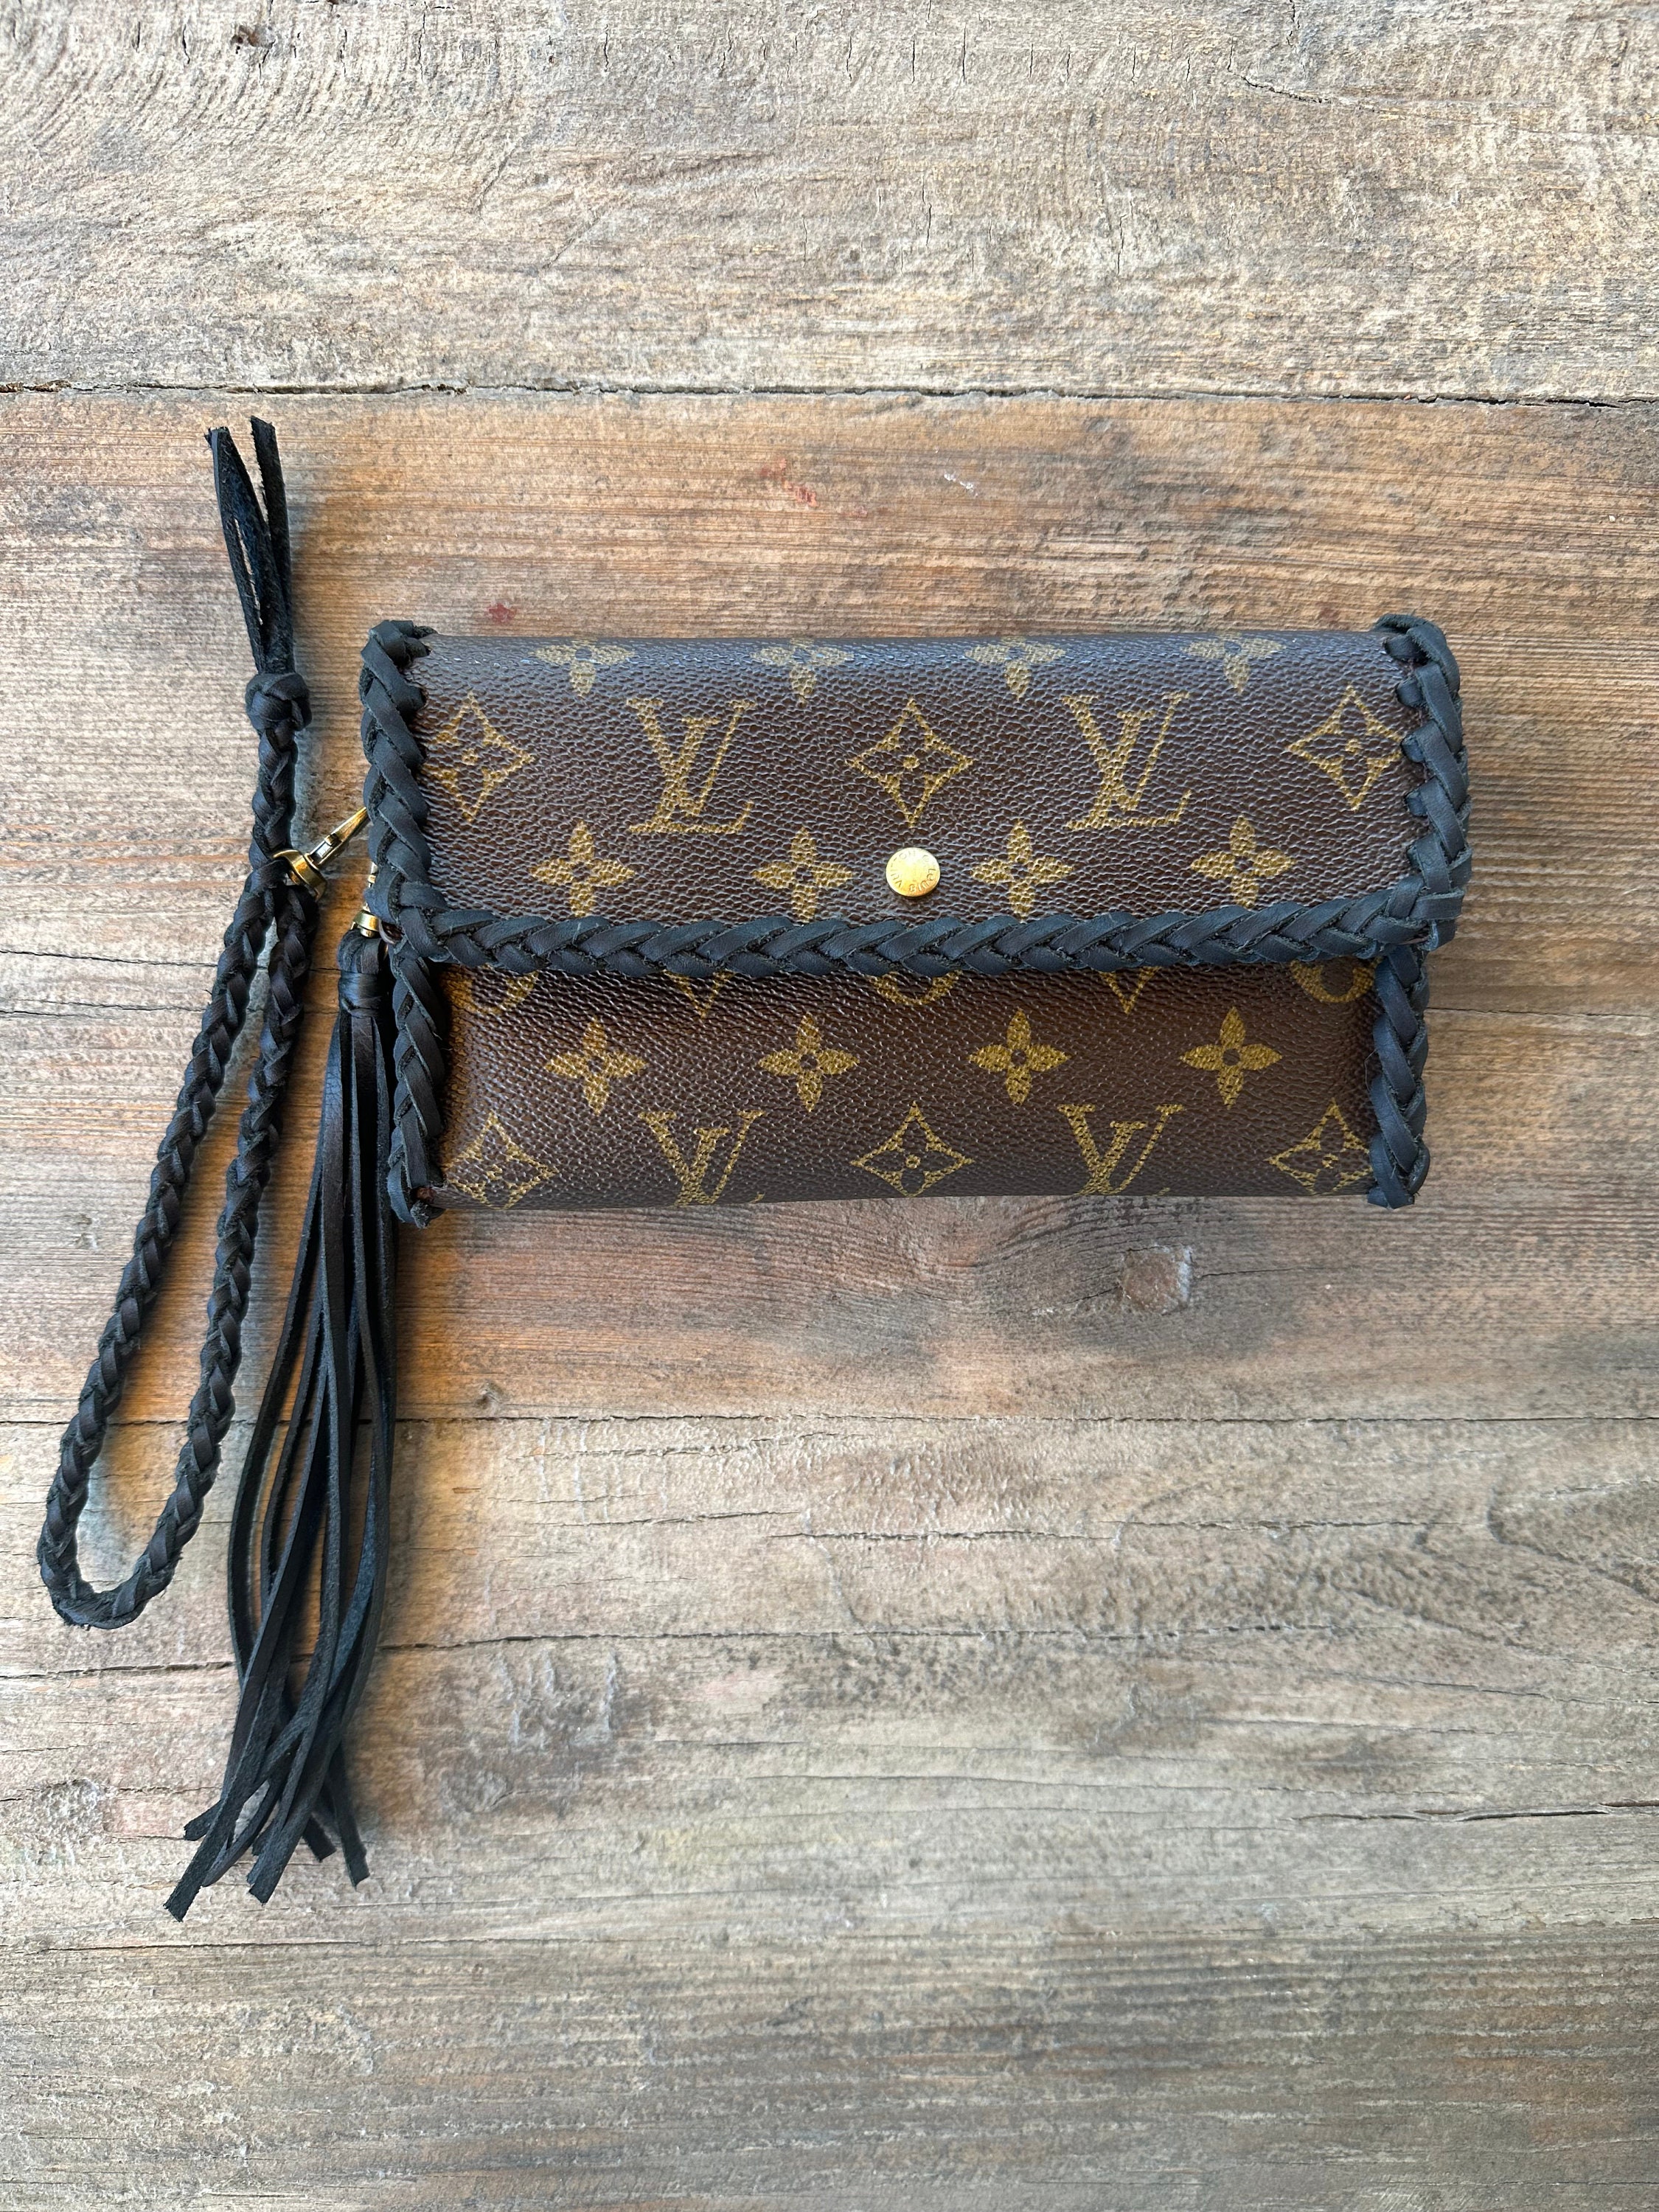 Crafts By Claudia - Louis Vuitton Inspired Wristlet Key Chain  #LouisVuittonInspired #LV #KeyChain #WristletKeyChain #Wristlet  #FauxLeather #ShopSmallBusiness #SupportYourLocalBusinesses